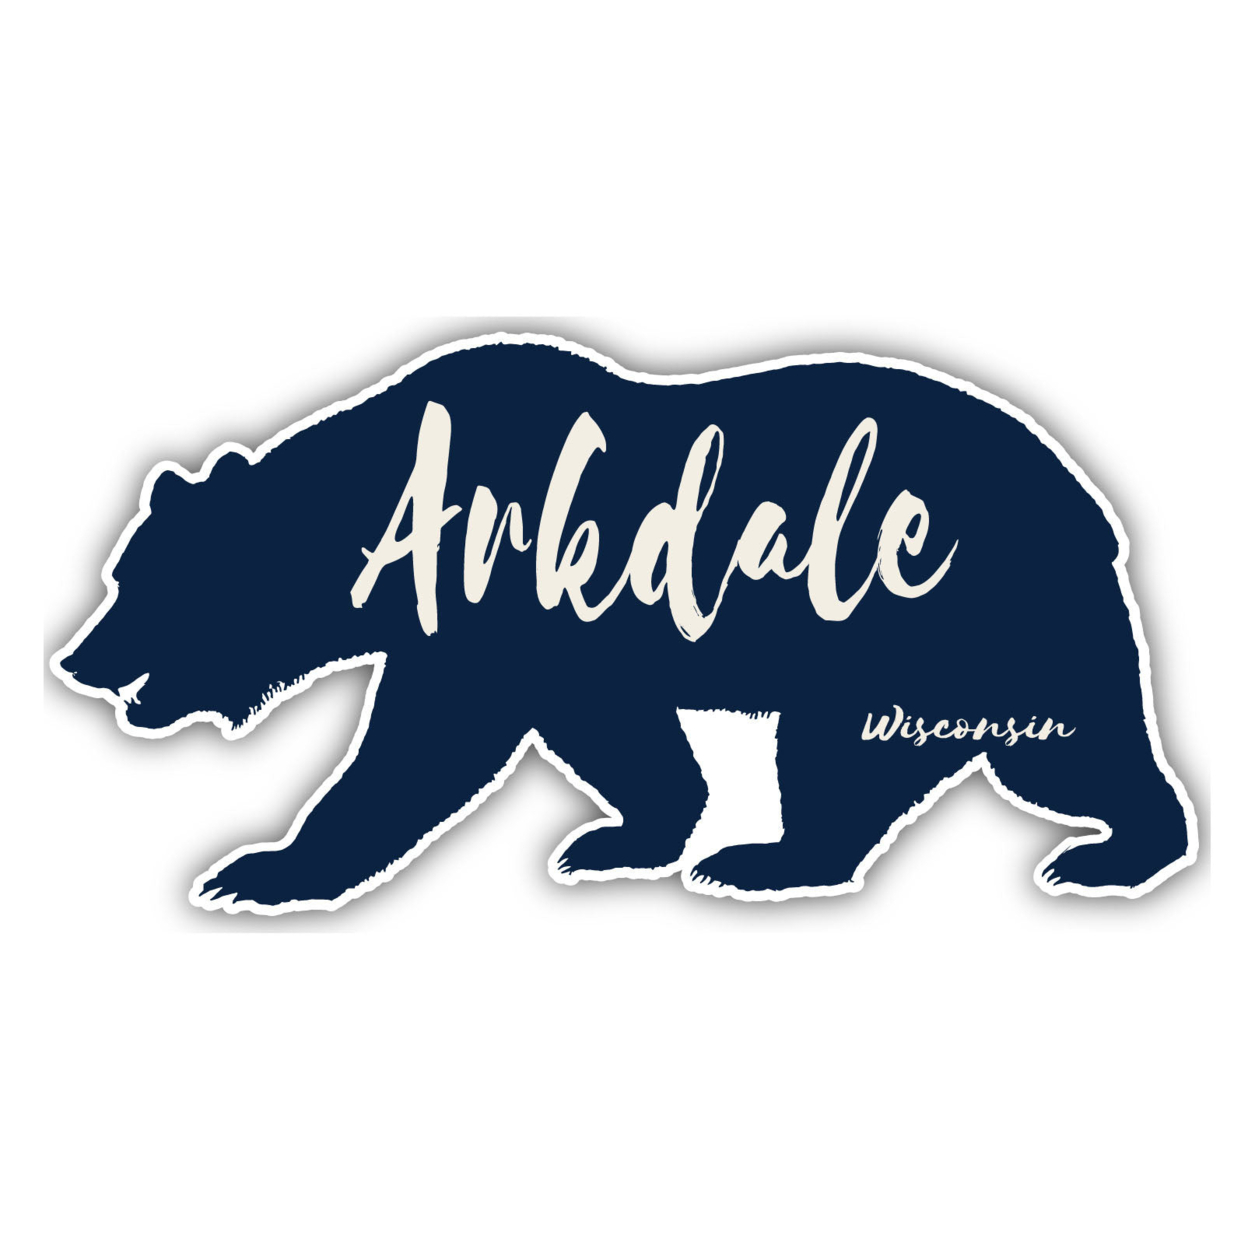 Arkdale Wisconsin Souvenir Decorative Stickers (Choose Theme And Size) - Single Unit, 12-Inch, Tent